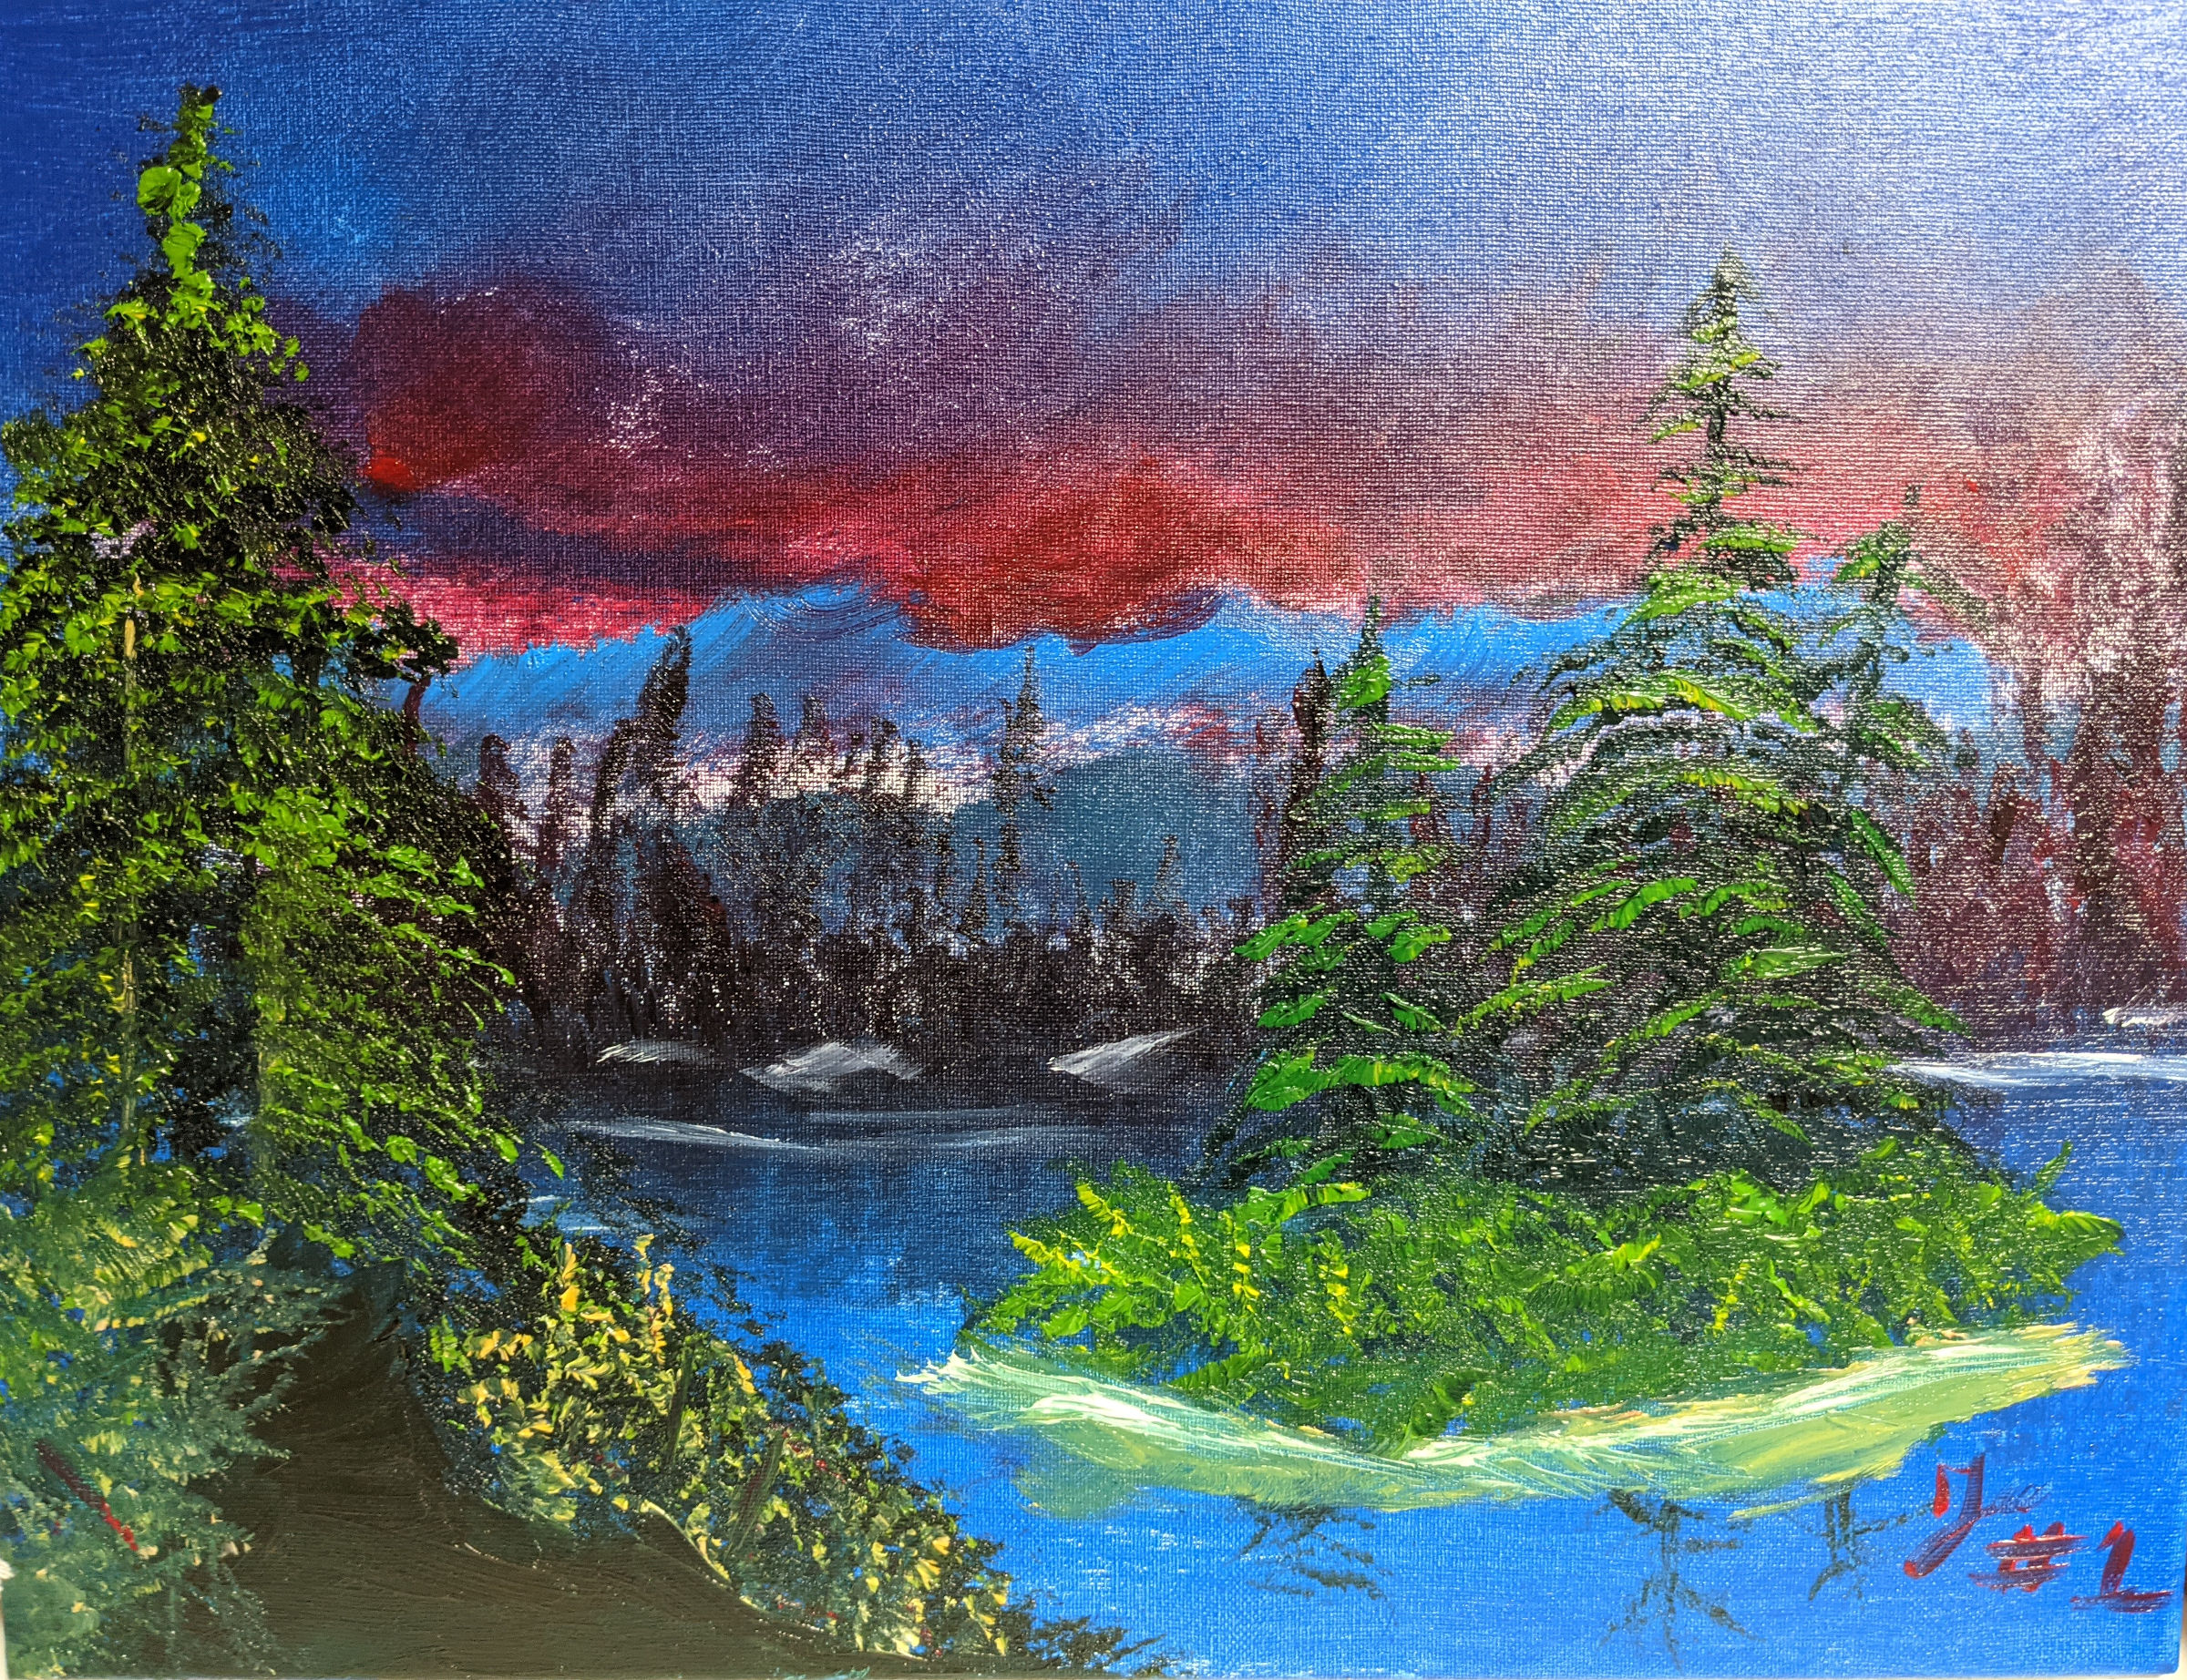 Oil painting of small pond with an island of trees in the middle. Mountains of trees in the background.